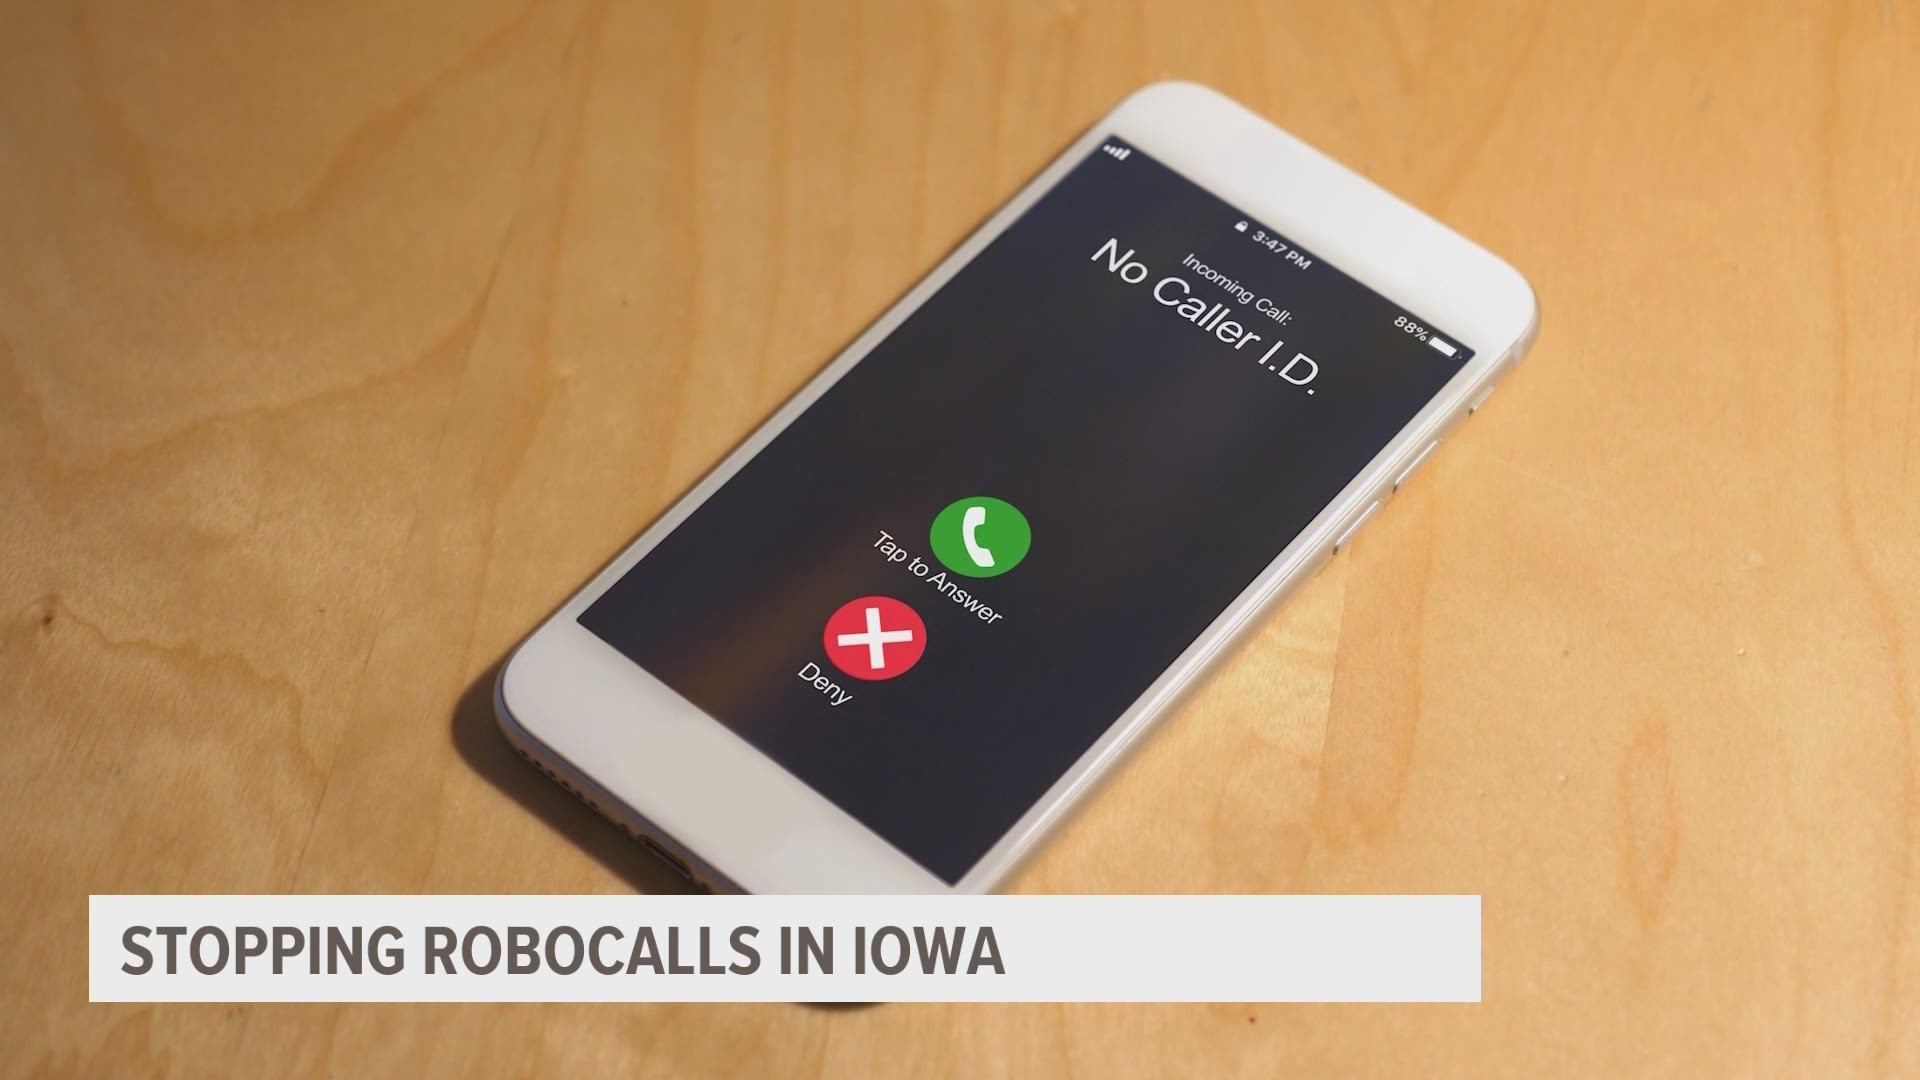 By ignoring the call, the automated system used to spam callers won't register your number as active.